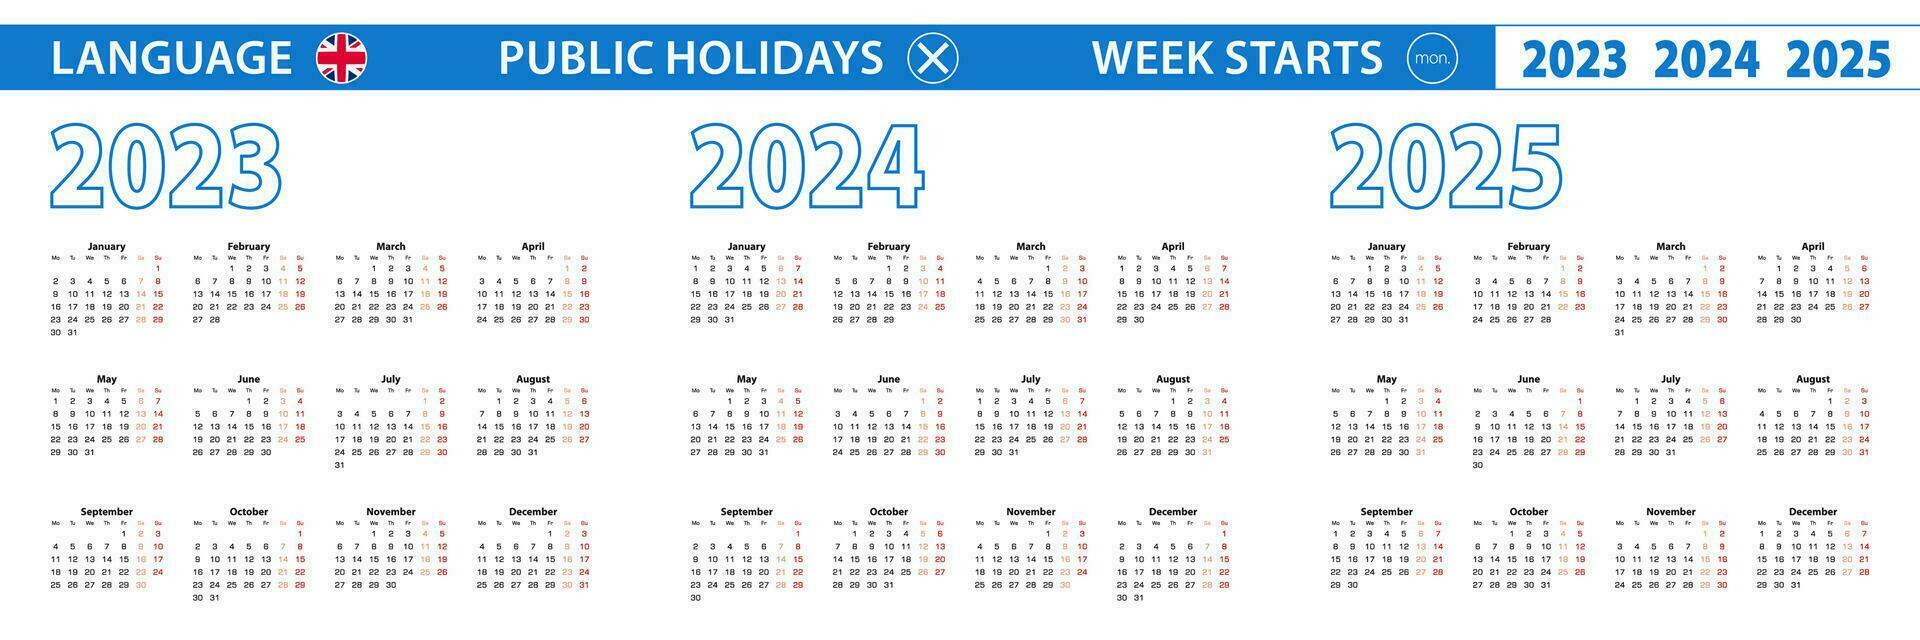 Simple calendar template in English for 2023, 2024, 2025 years. Week starts from Monday. vector